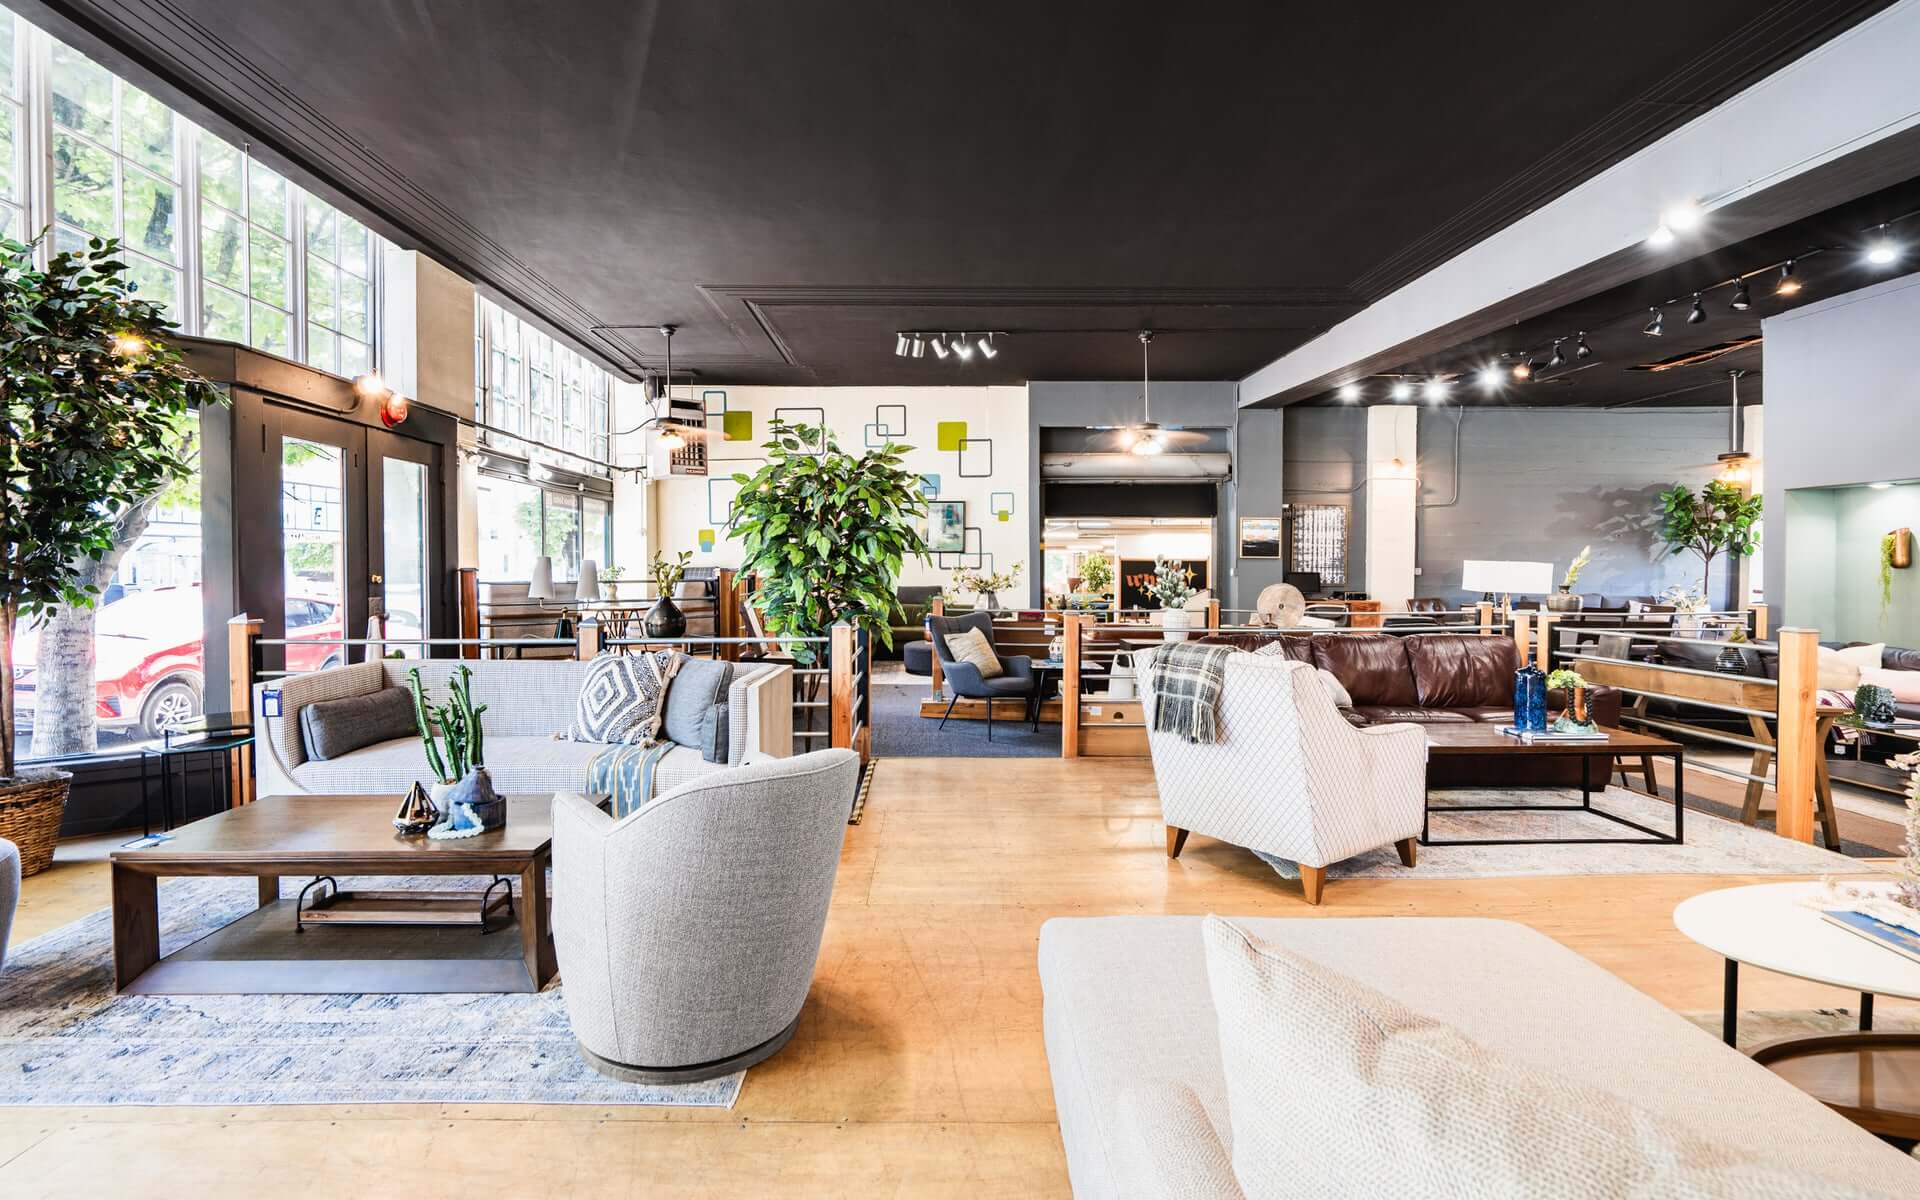 Explore What’s New Furniture’s inviting furniture showroom in the heart of Portland, Oregon